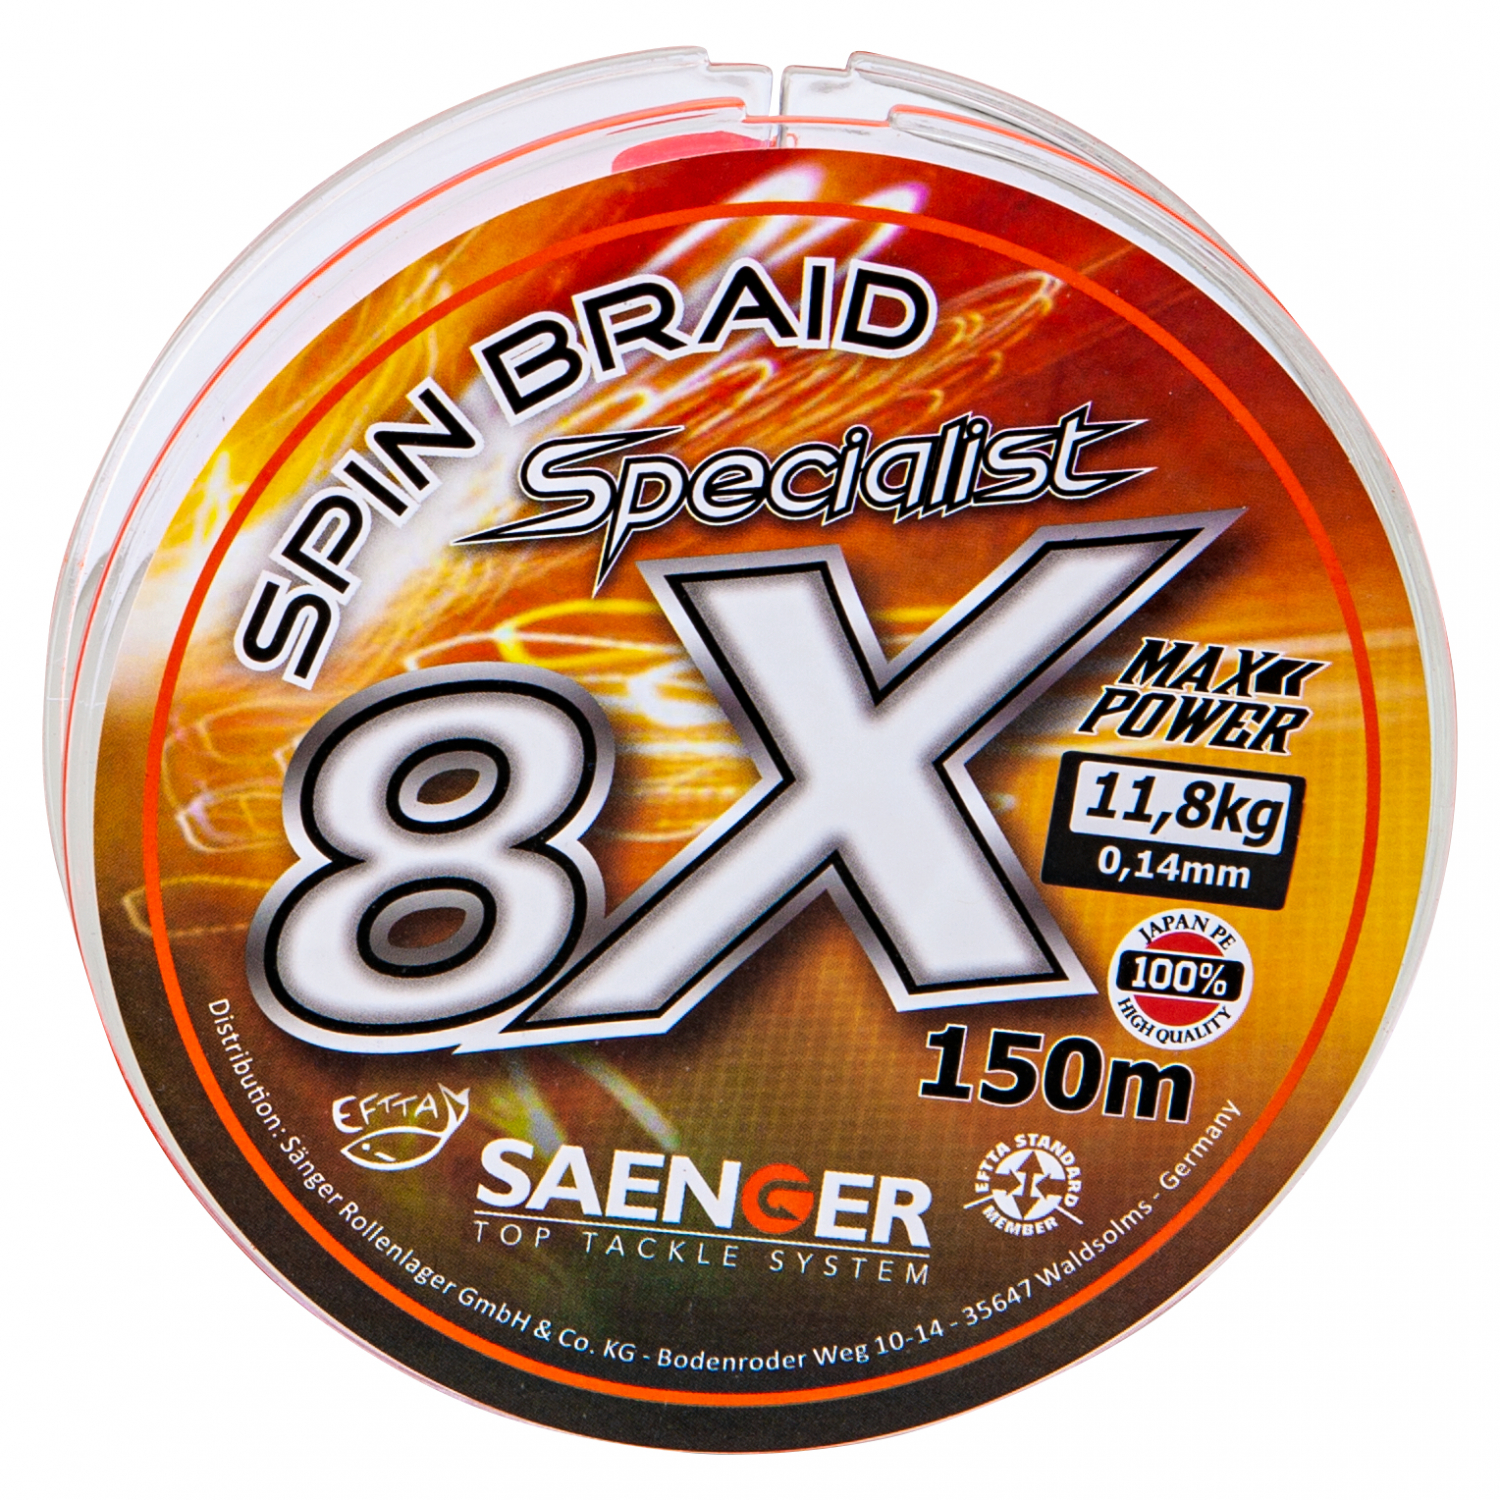 Sänger Fishing line Spin Braid Specialist 8x (fluo/orange) at low